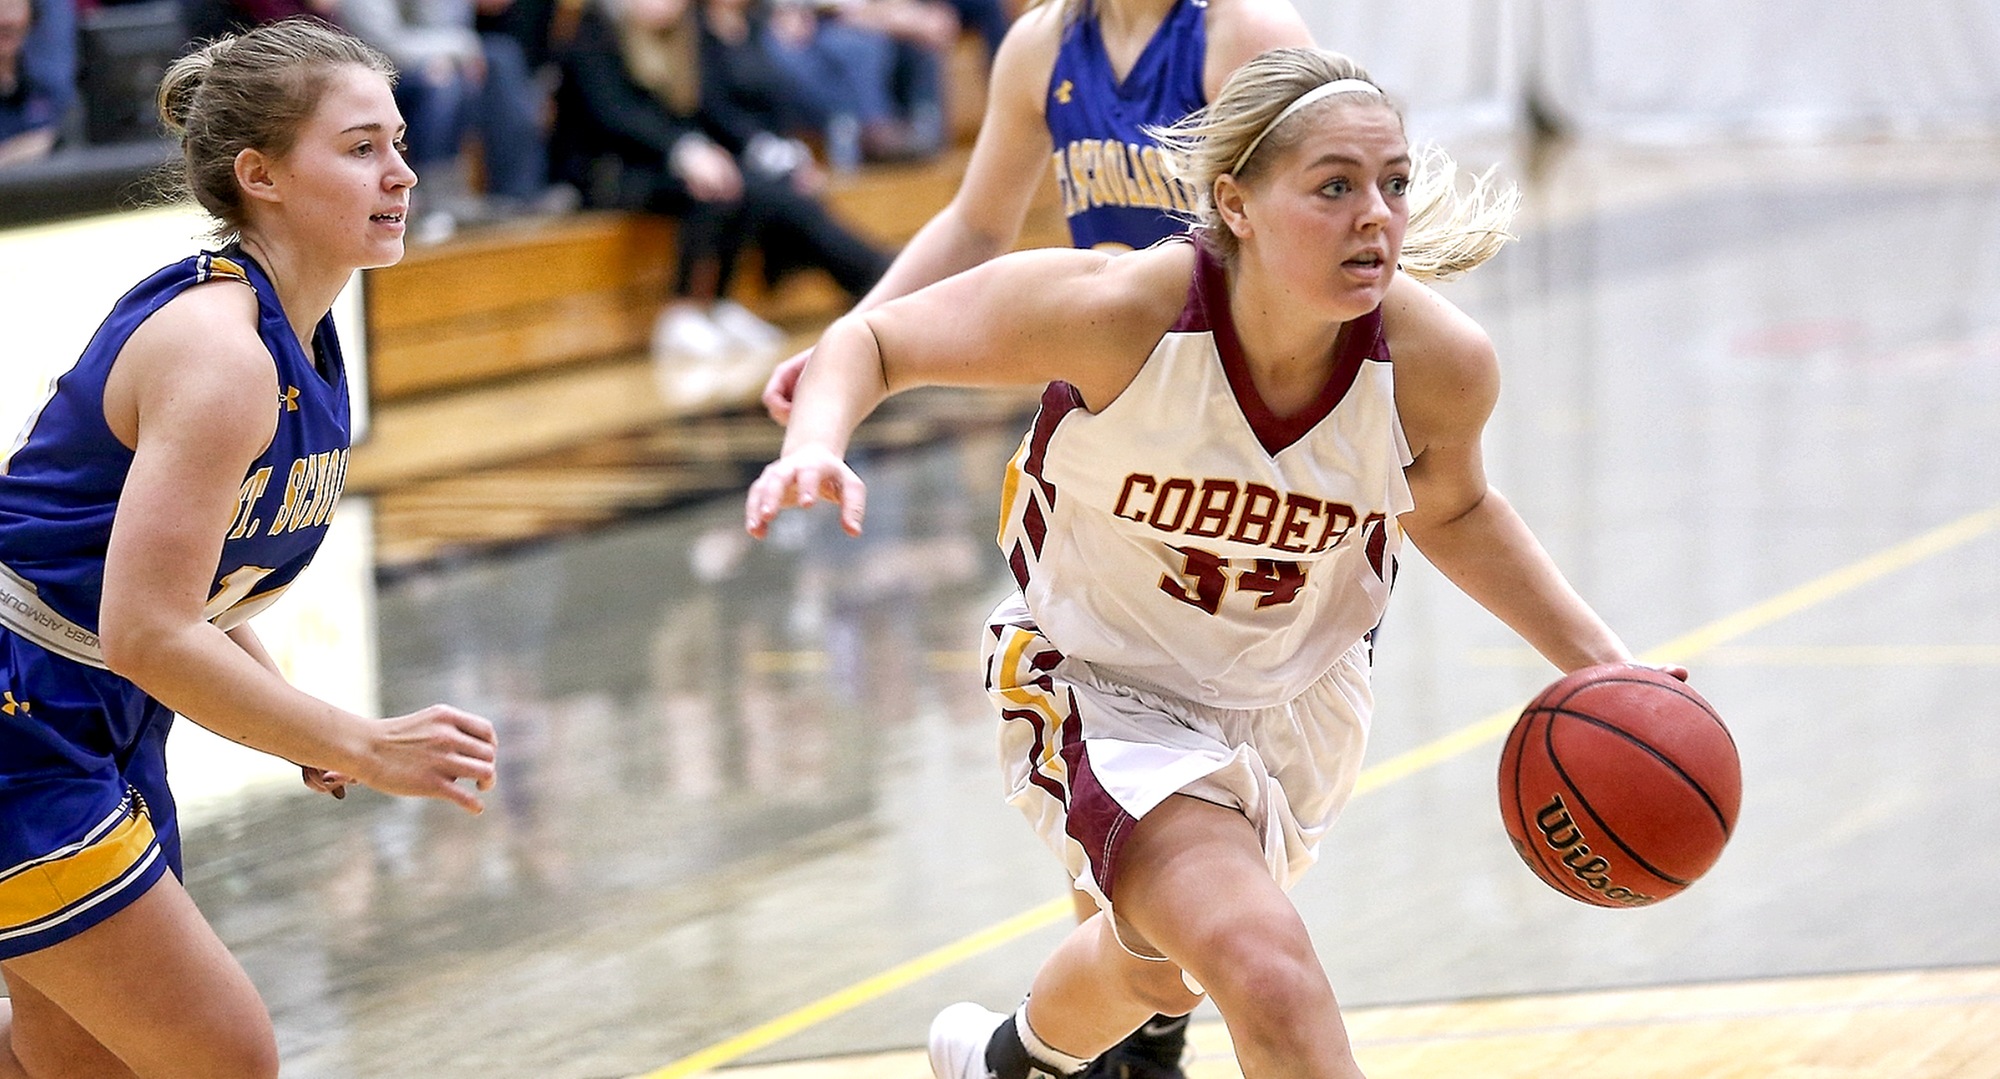 Grace Wolhowe drives to the basket for two of her team-high 20 points against St. Scholastica. (photo courtesy of Ryan Coleman, d3photography.com)